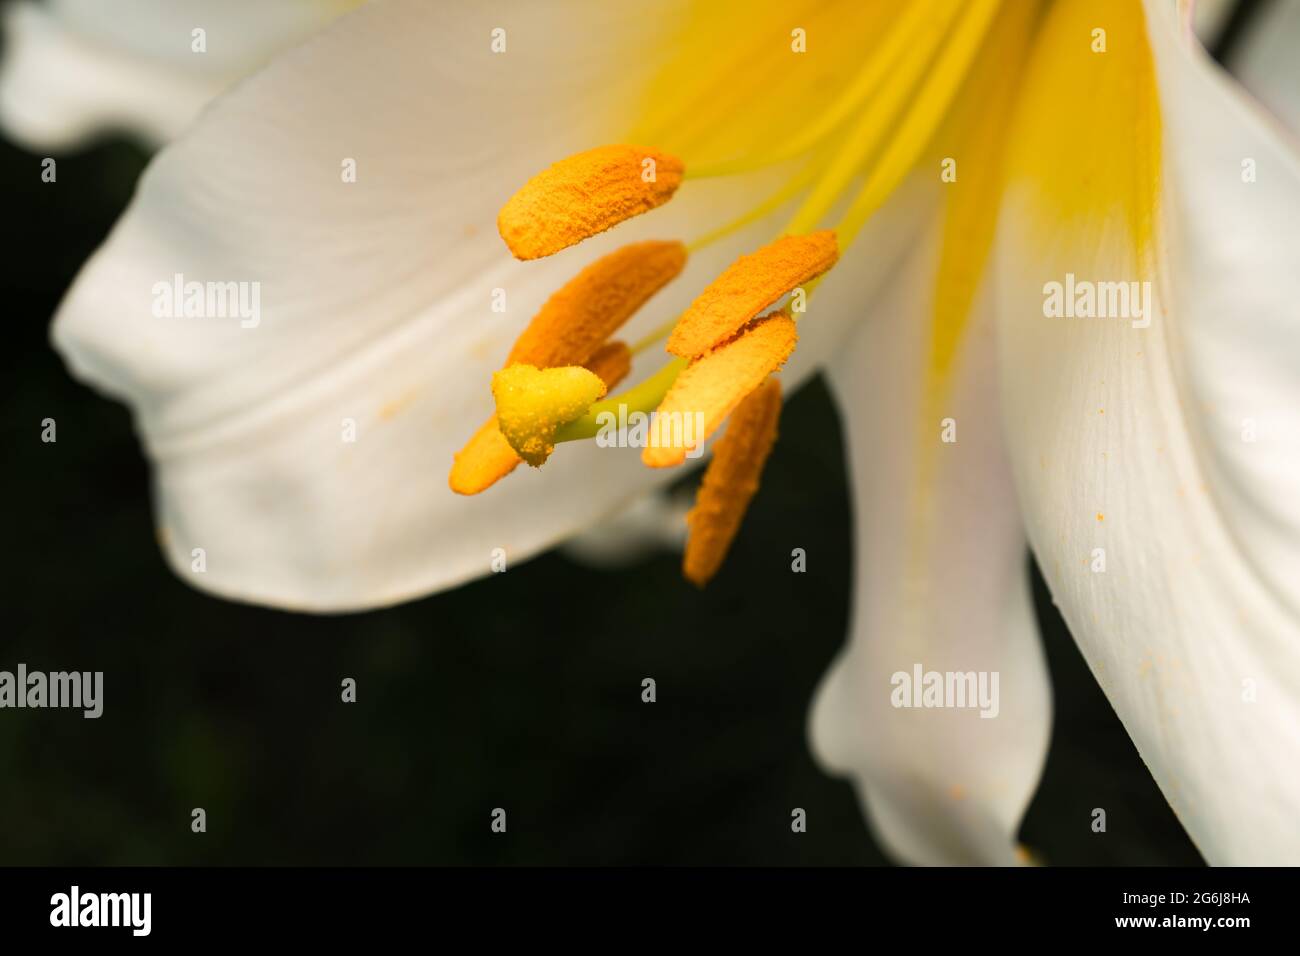 Lily flower with white petals, pistil and stamens close-up Stock Photo